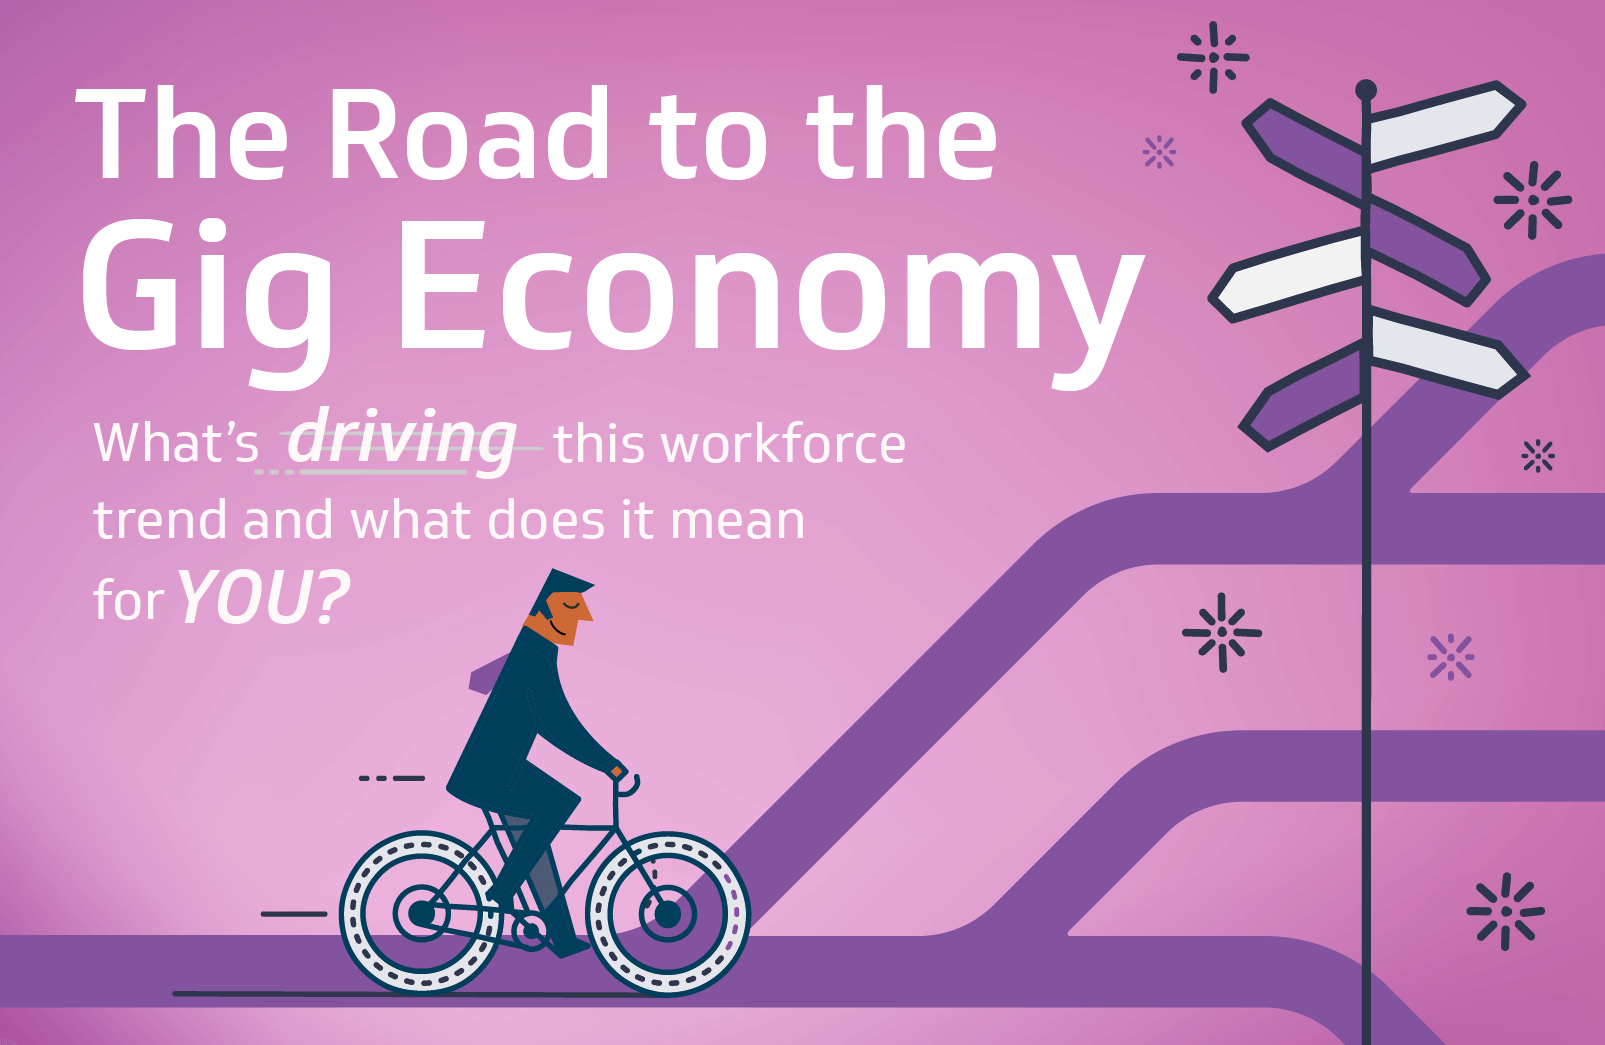 The Road to the Gig Economy